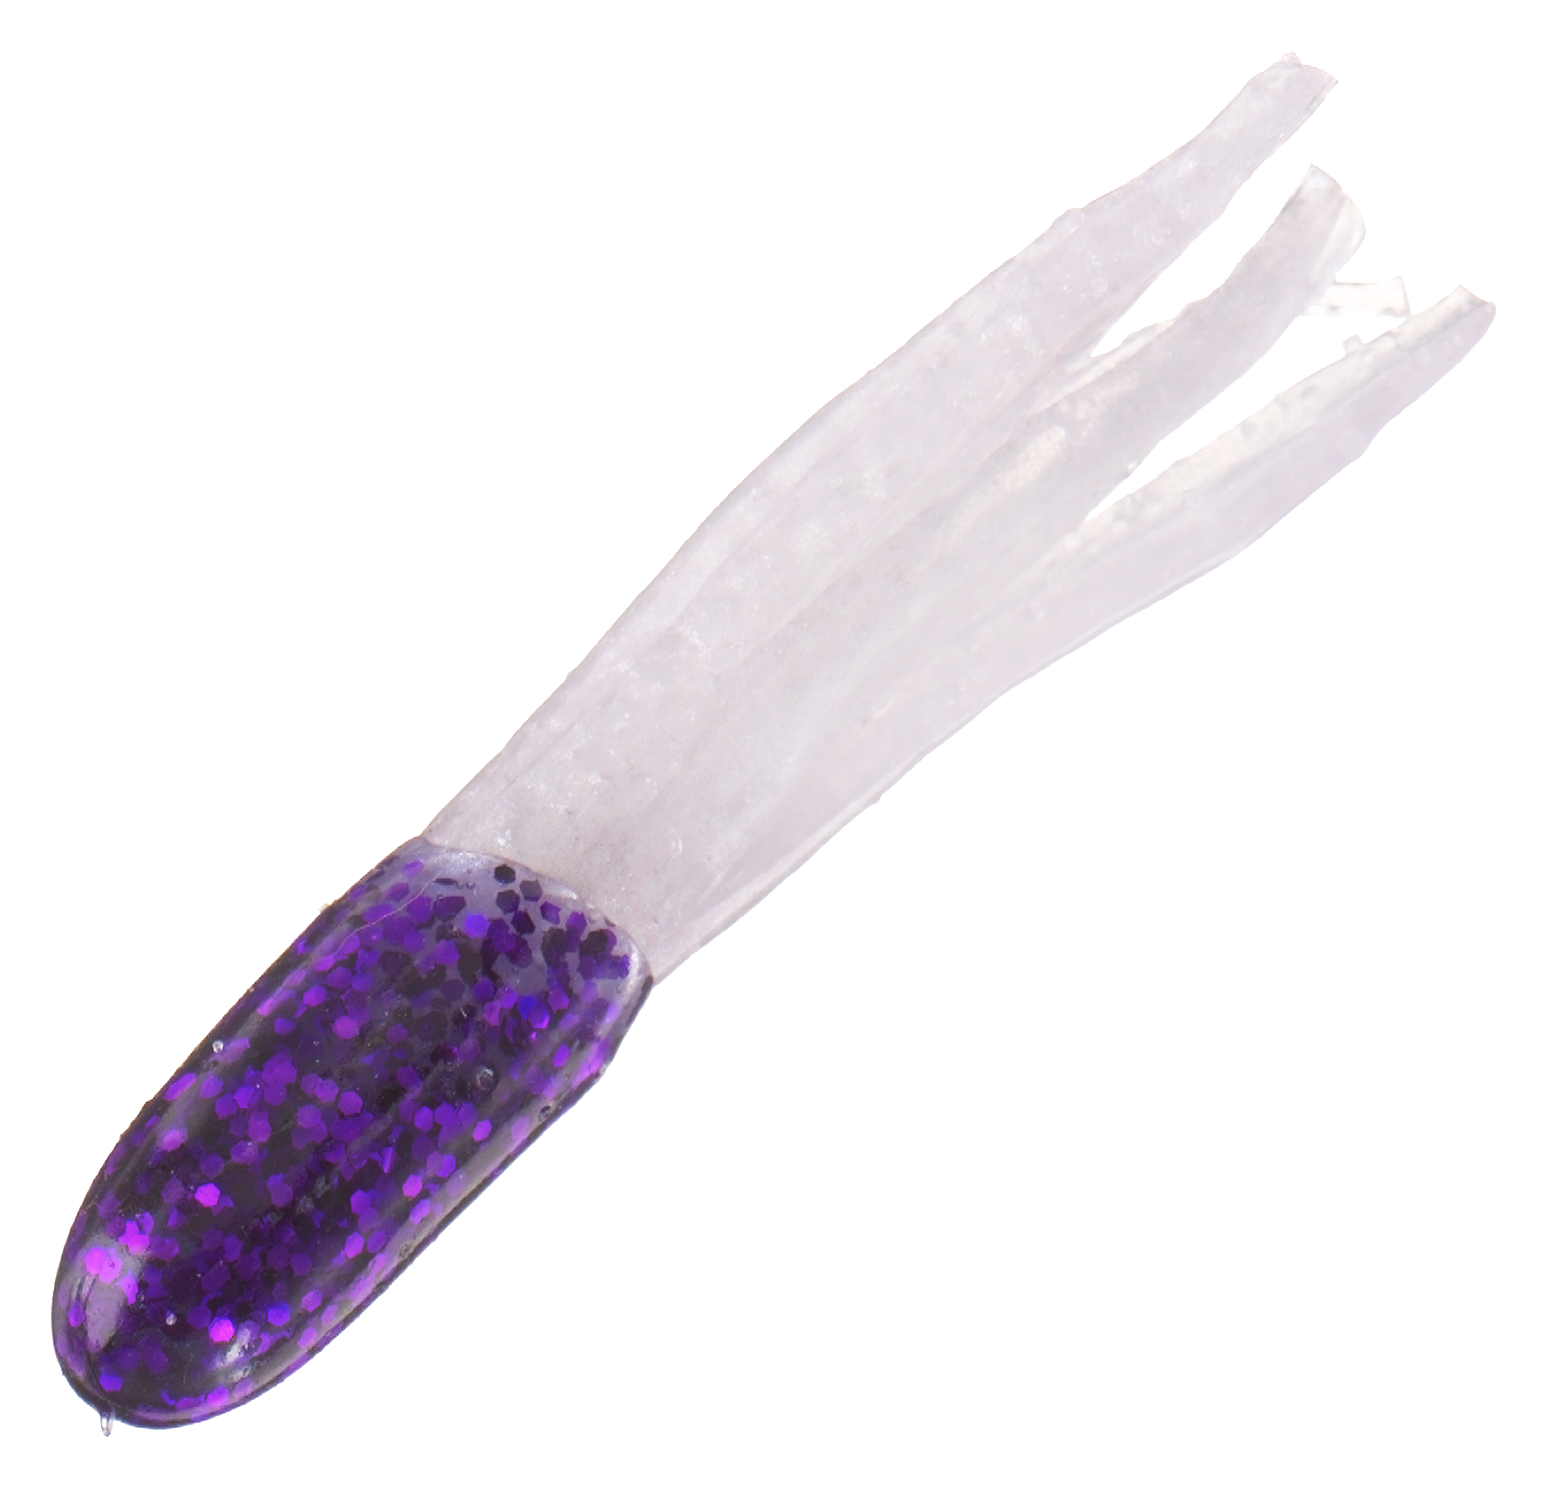 Bass Pro Shops Sparkle Squirts - 2"" - 10 pack - Electric Purple/White